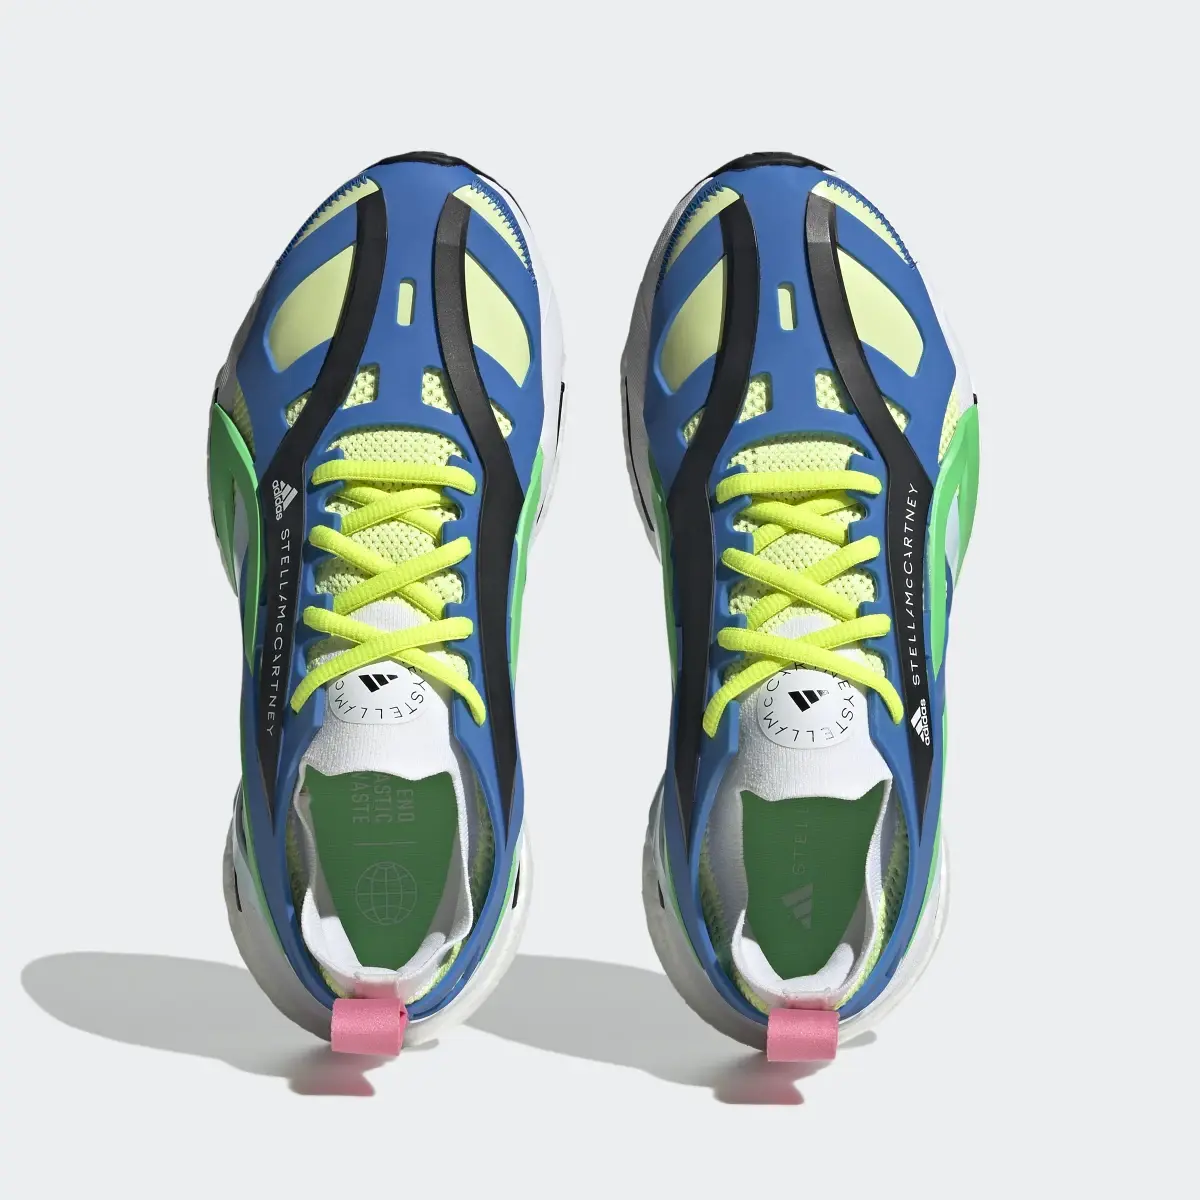 Adidas by Stella McCartney Solarglide Running Shoes. 3